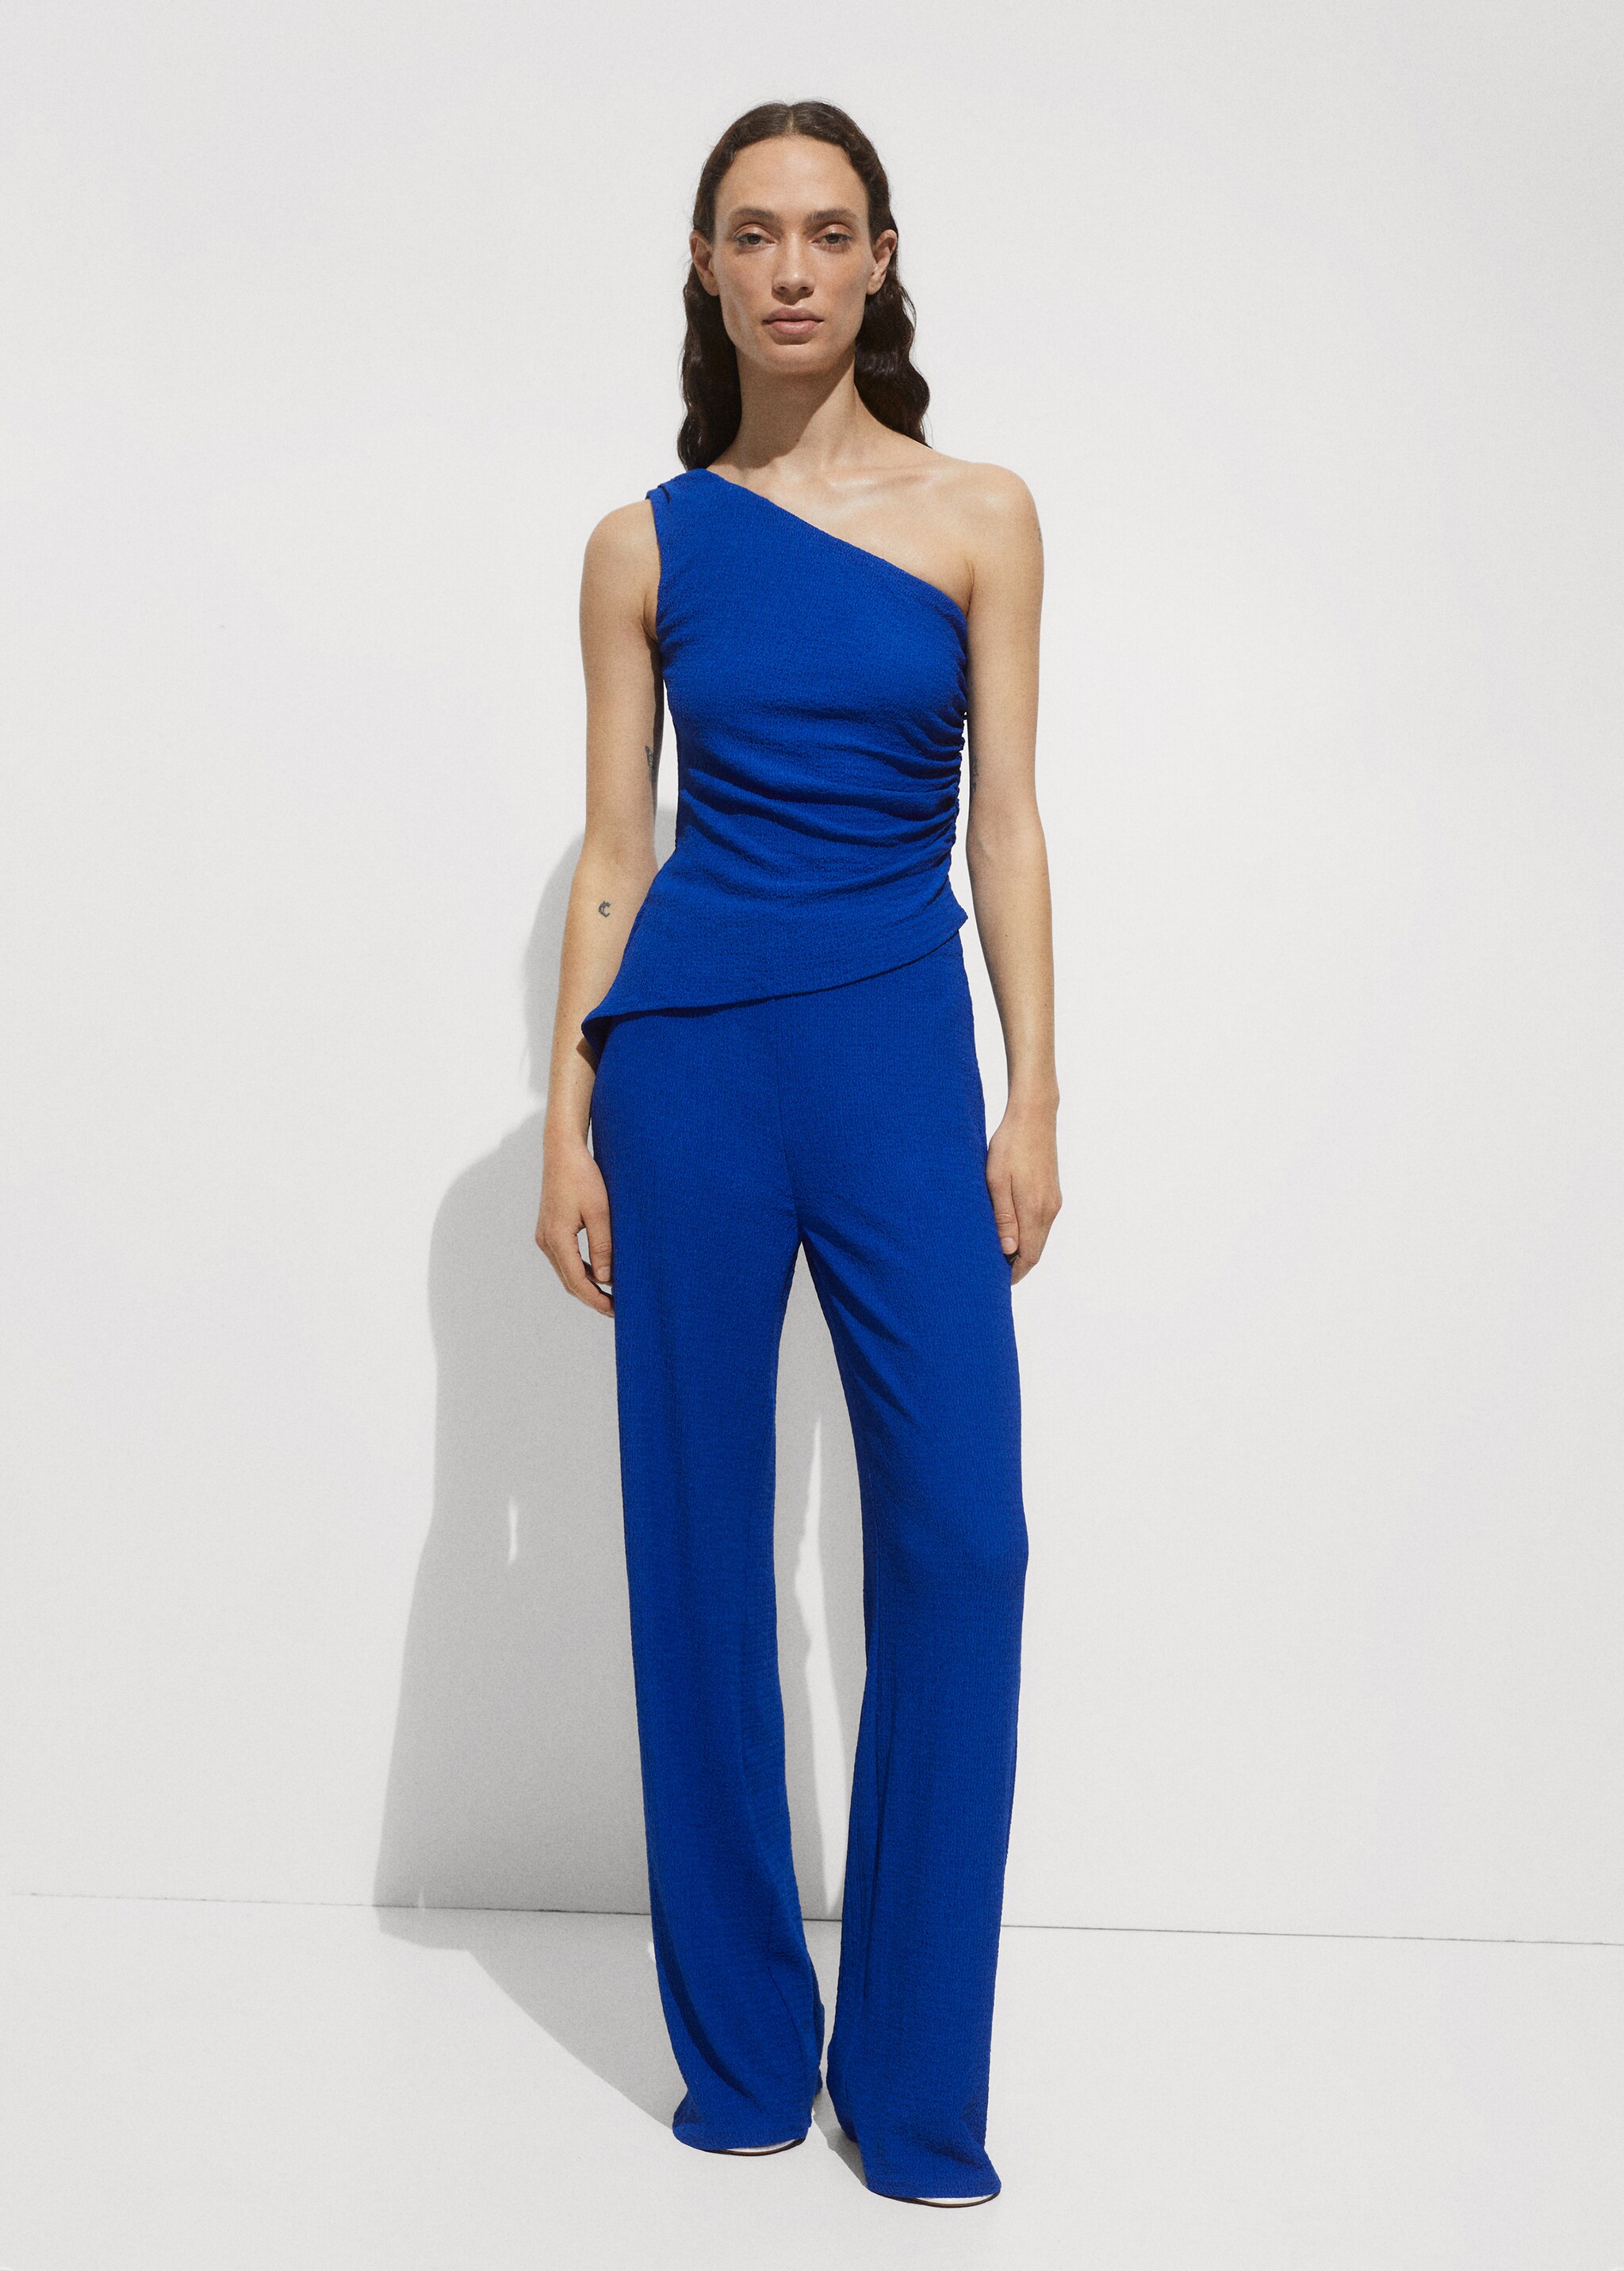 Flowy straight-fit trousers - General plane